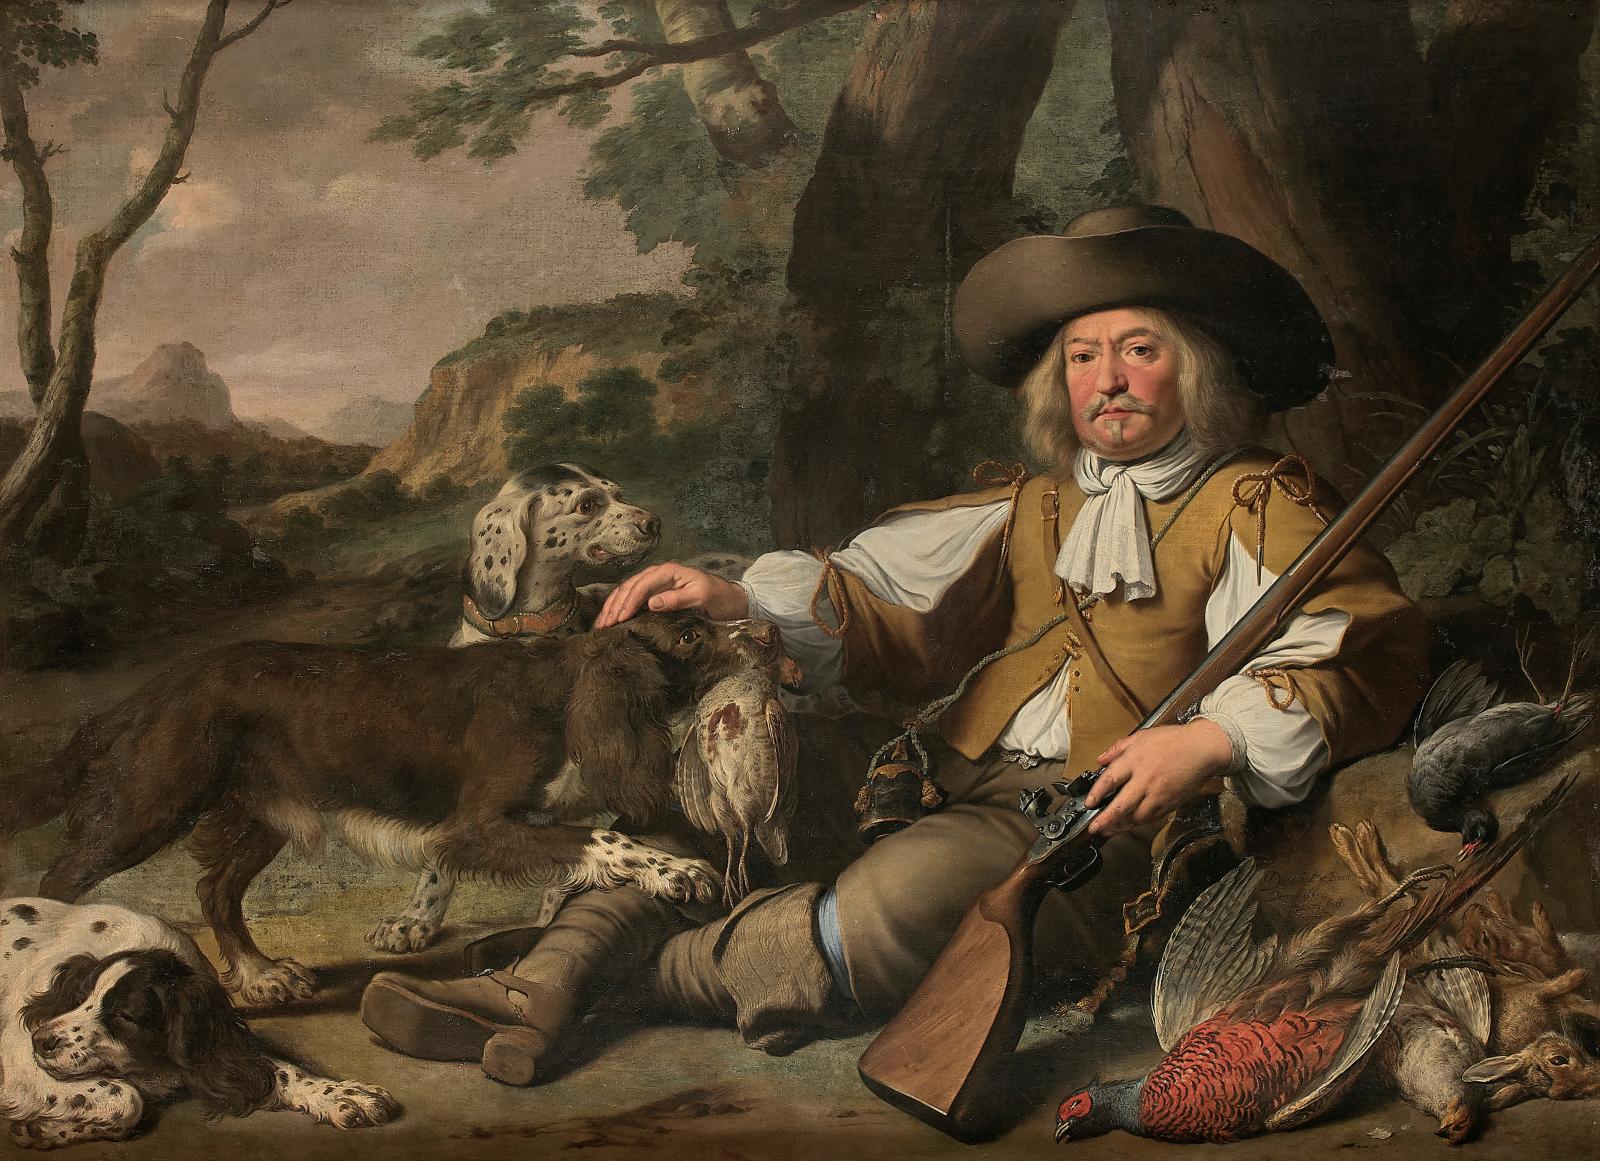 The First French Portrait of a Hunter?